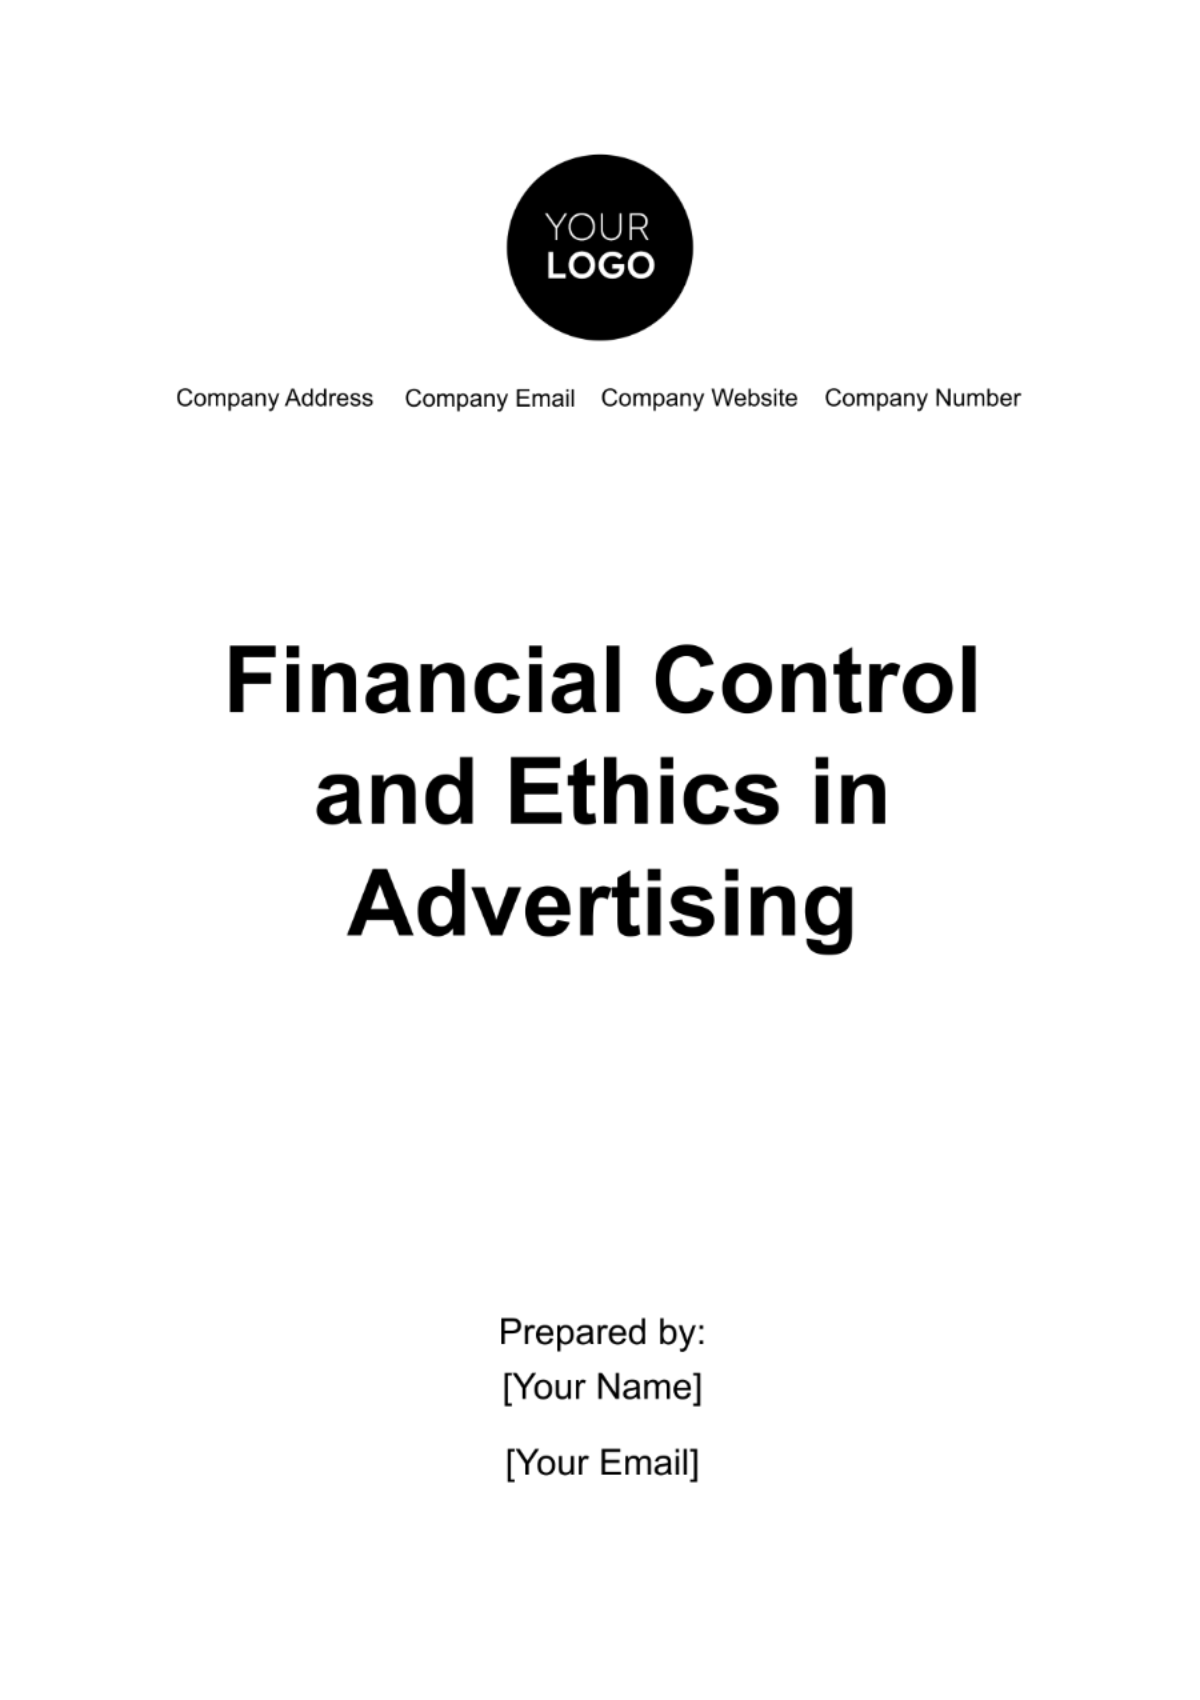 Financial Control and Ethics in Advertising Template